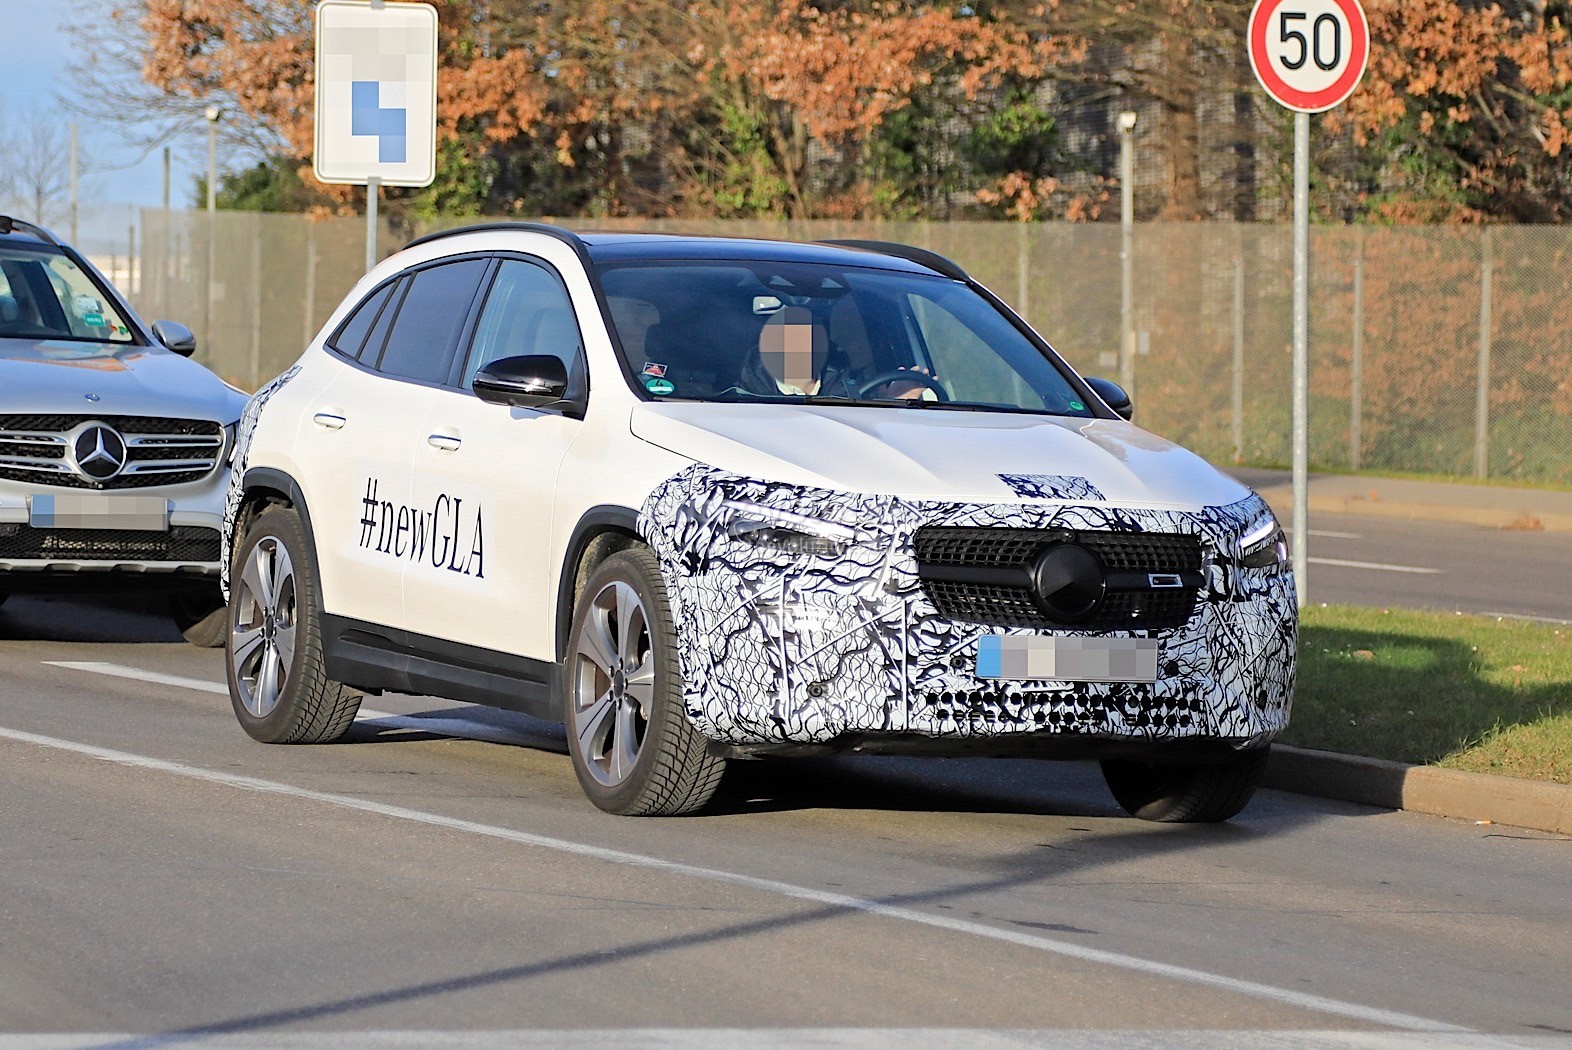 https://s1.cdn.autoevolution.com/images/news/gallery/2020-mercedes-benz-gla-prototype-strips-2-days-before-official-reveal_2.jpg